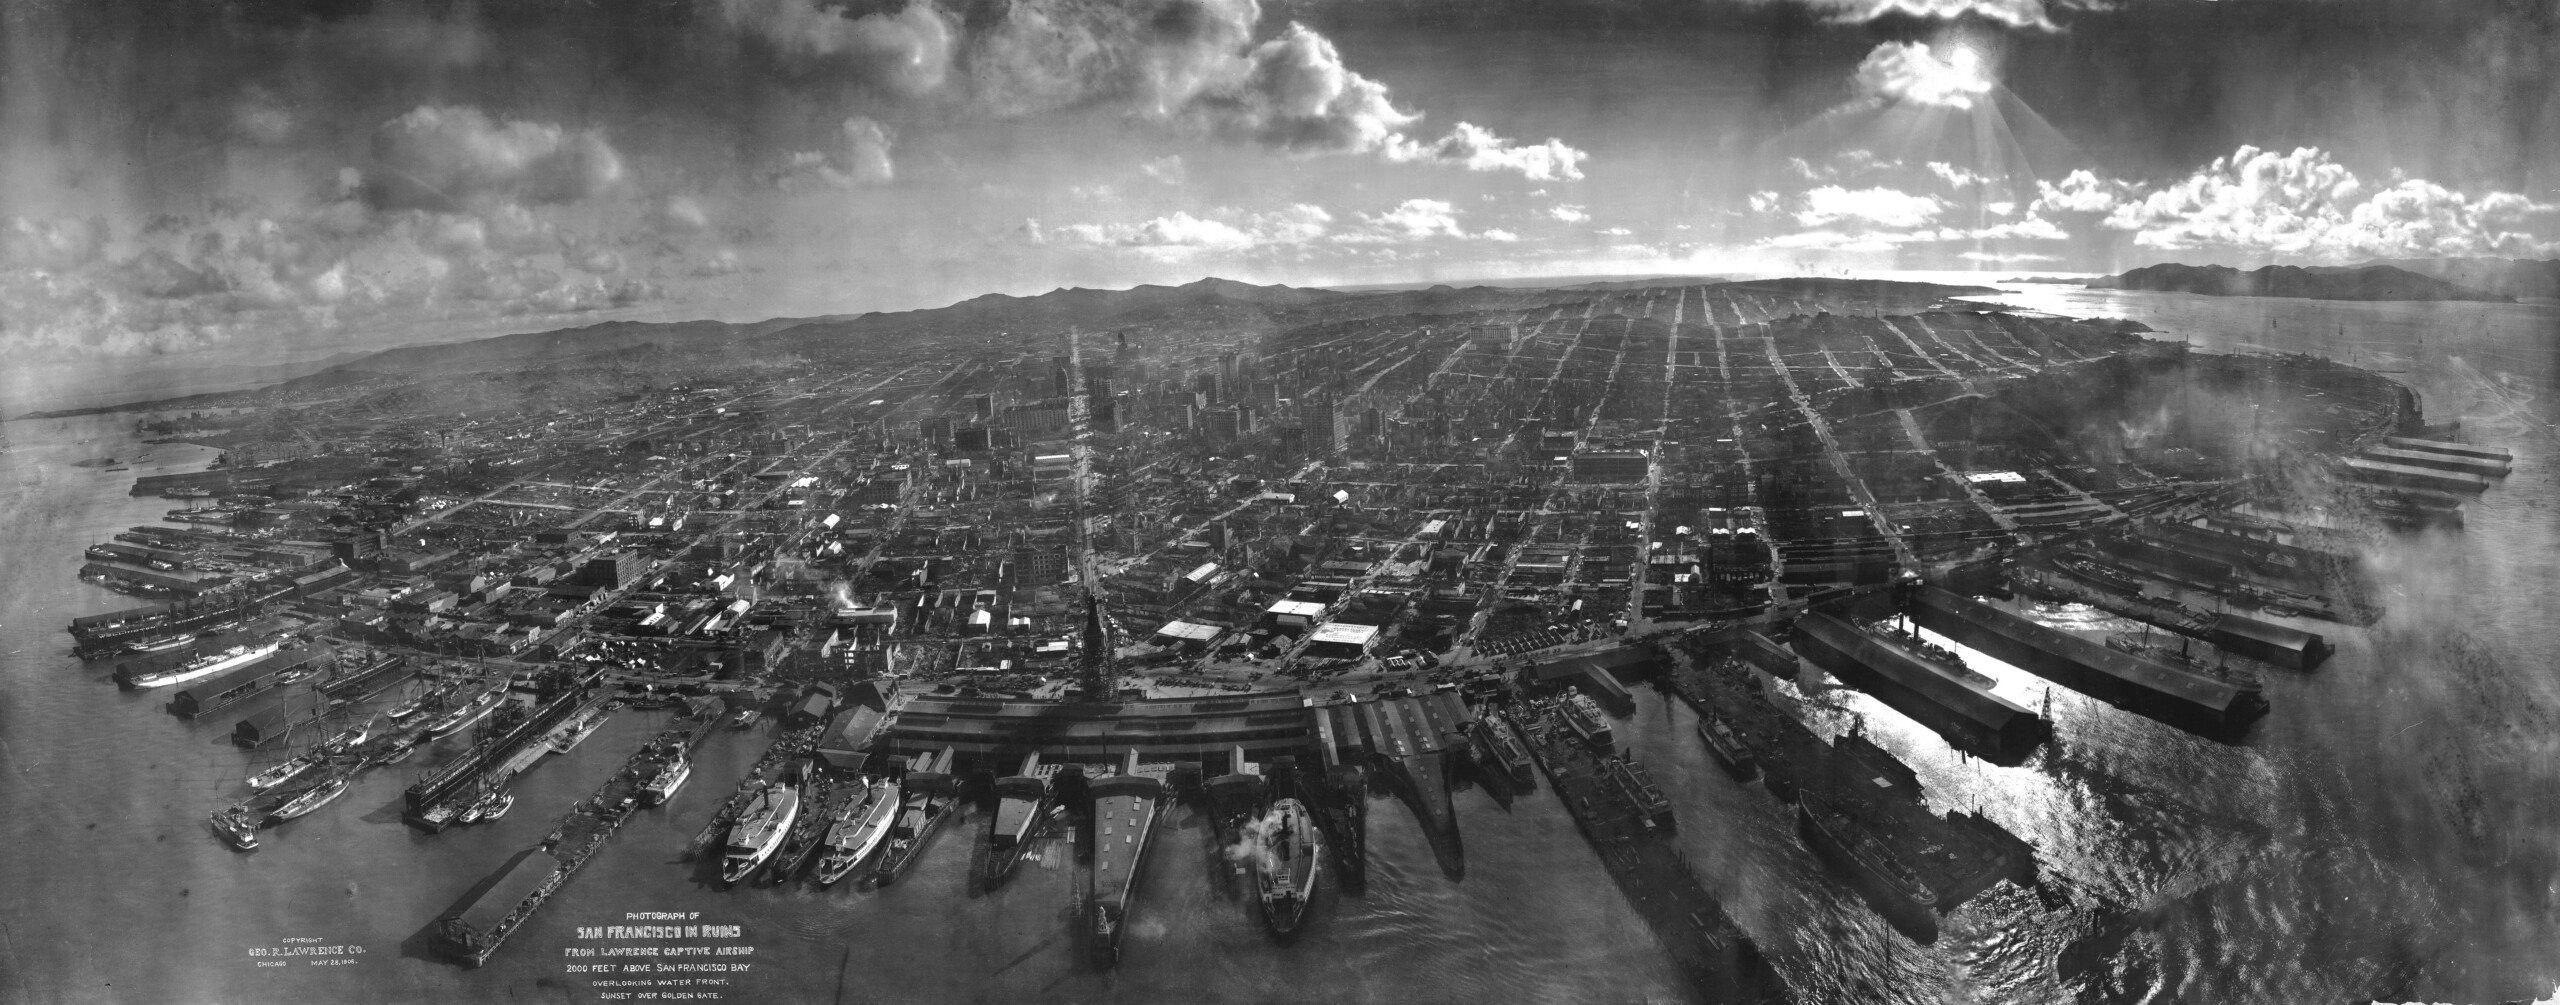 A grayscale aerial panorama of San Francisco, captured in 1920. The image shows the city's extensive waterfront, numerous docks, and ships along the bay. The urban landscape stretches back towards rolling hills under a partly cloudy sky.